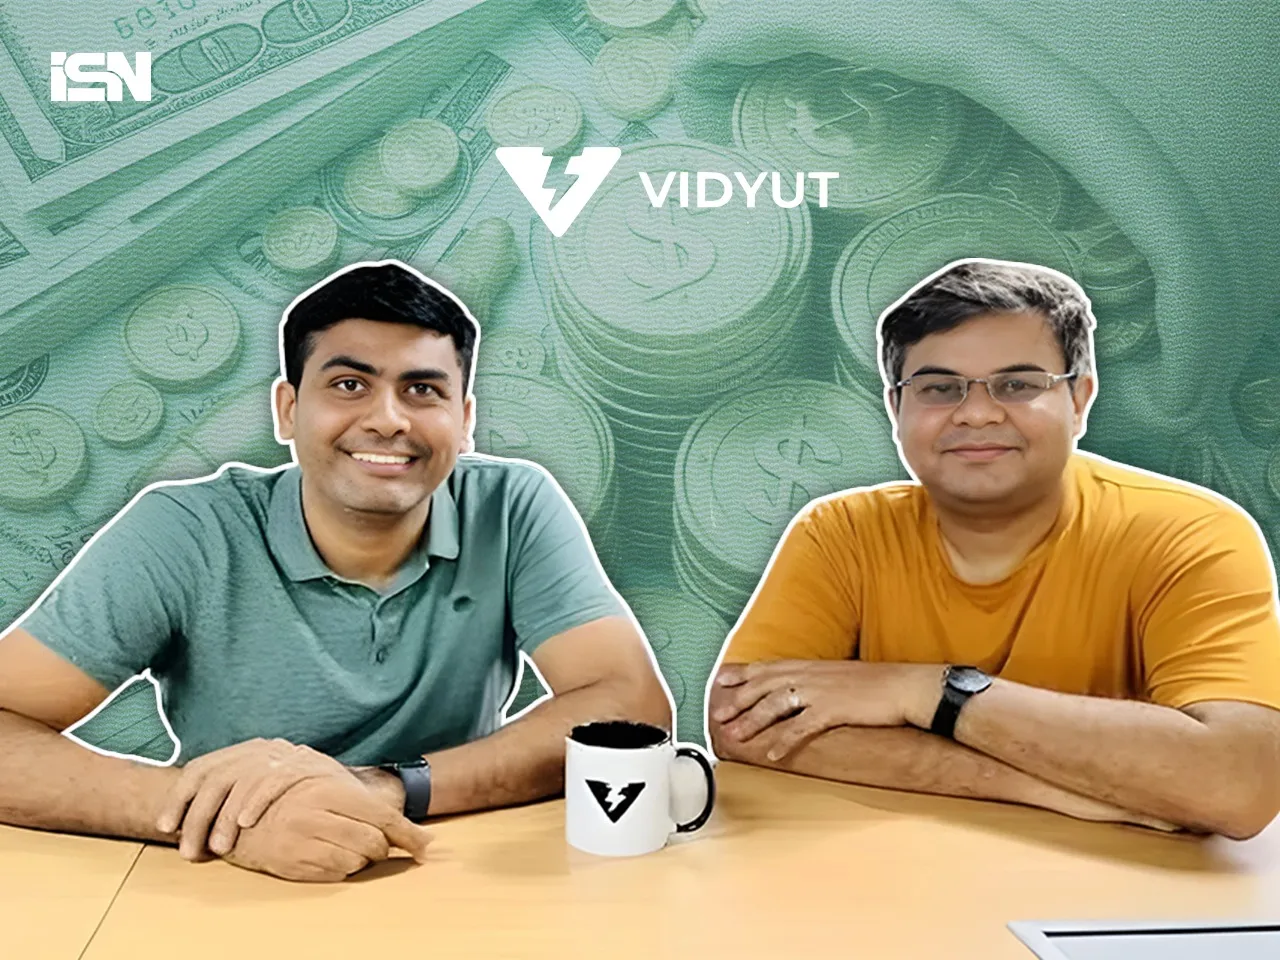 Vidyut specializing in financing and managing the lifecycle of EVs raises $10 million